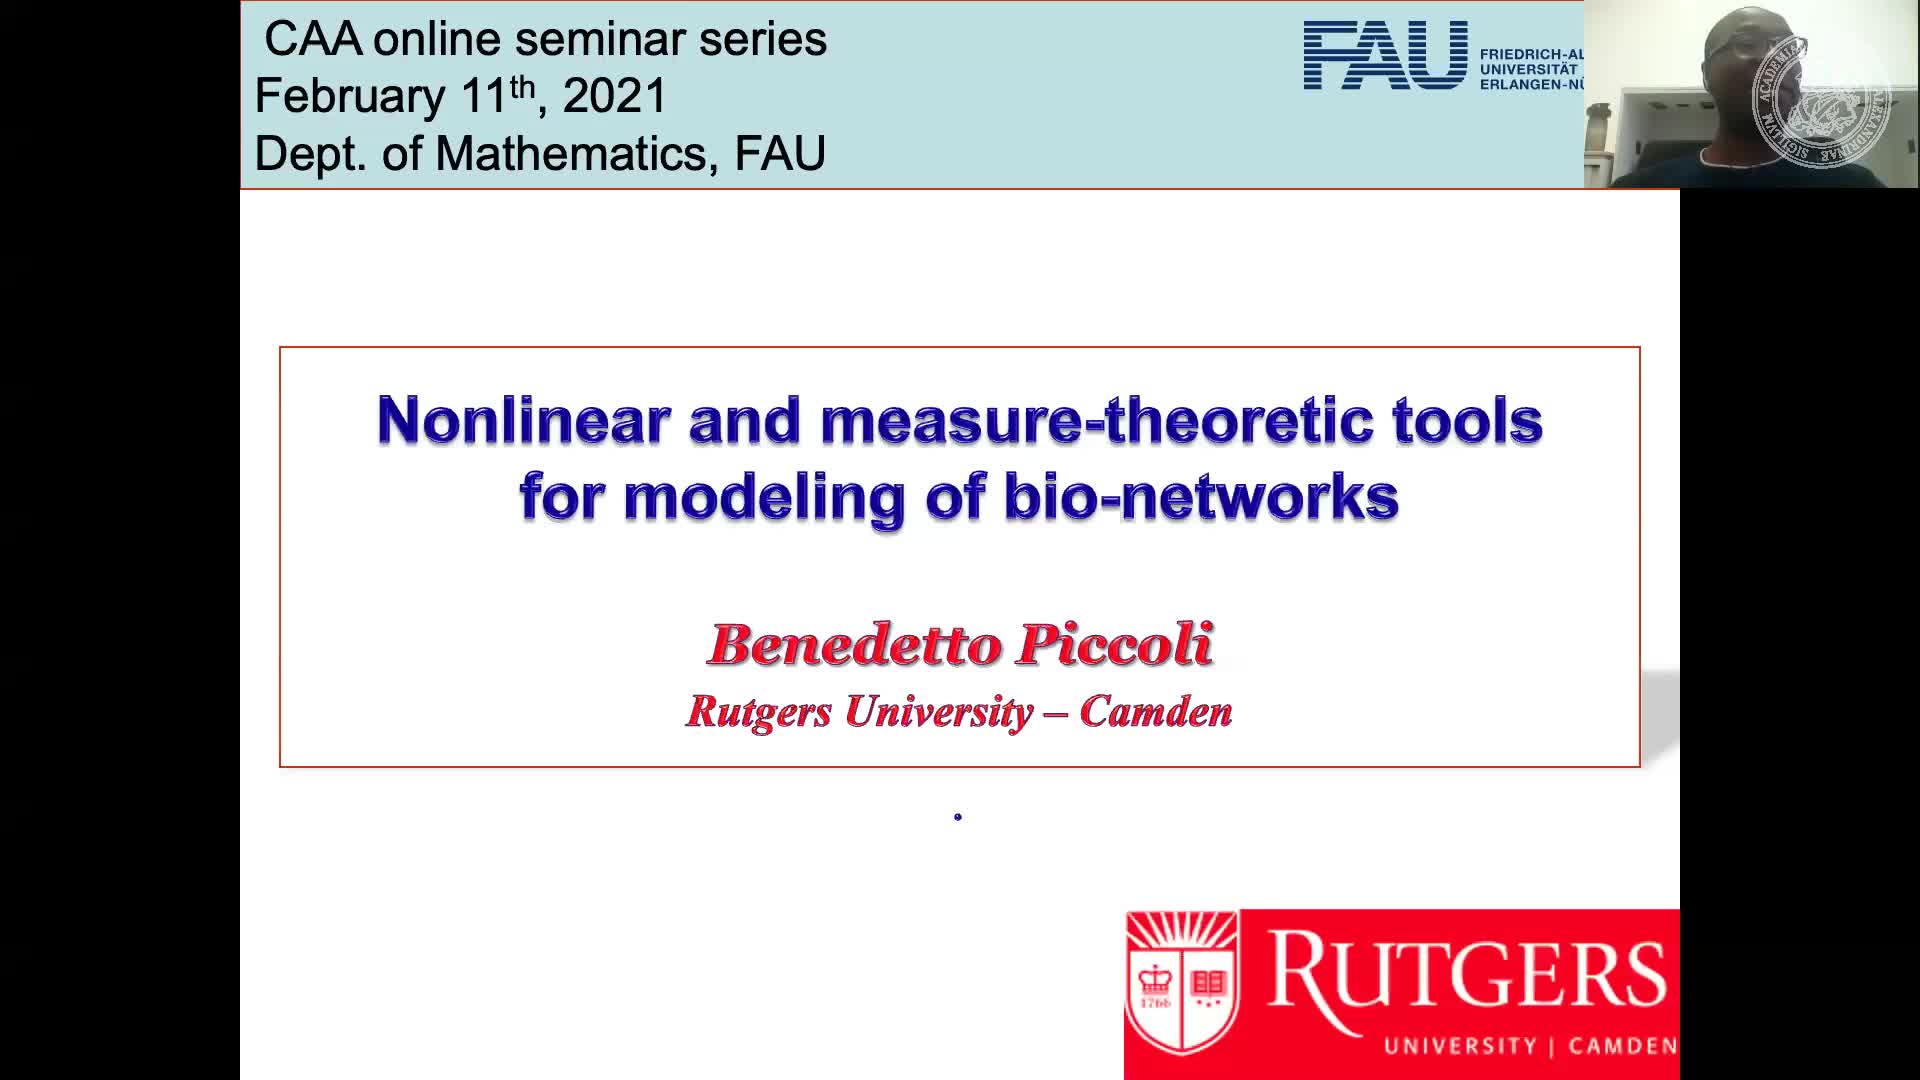 Nonlinear and measure-theoretic methods for large biological networks (Benedetto Piccoli, Rutgers University, USA) preview image